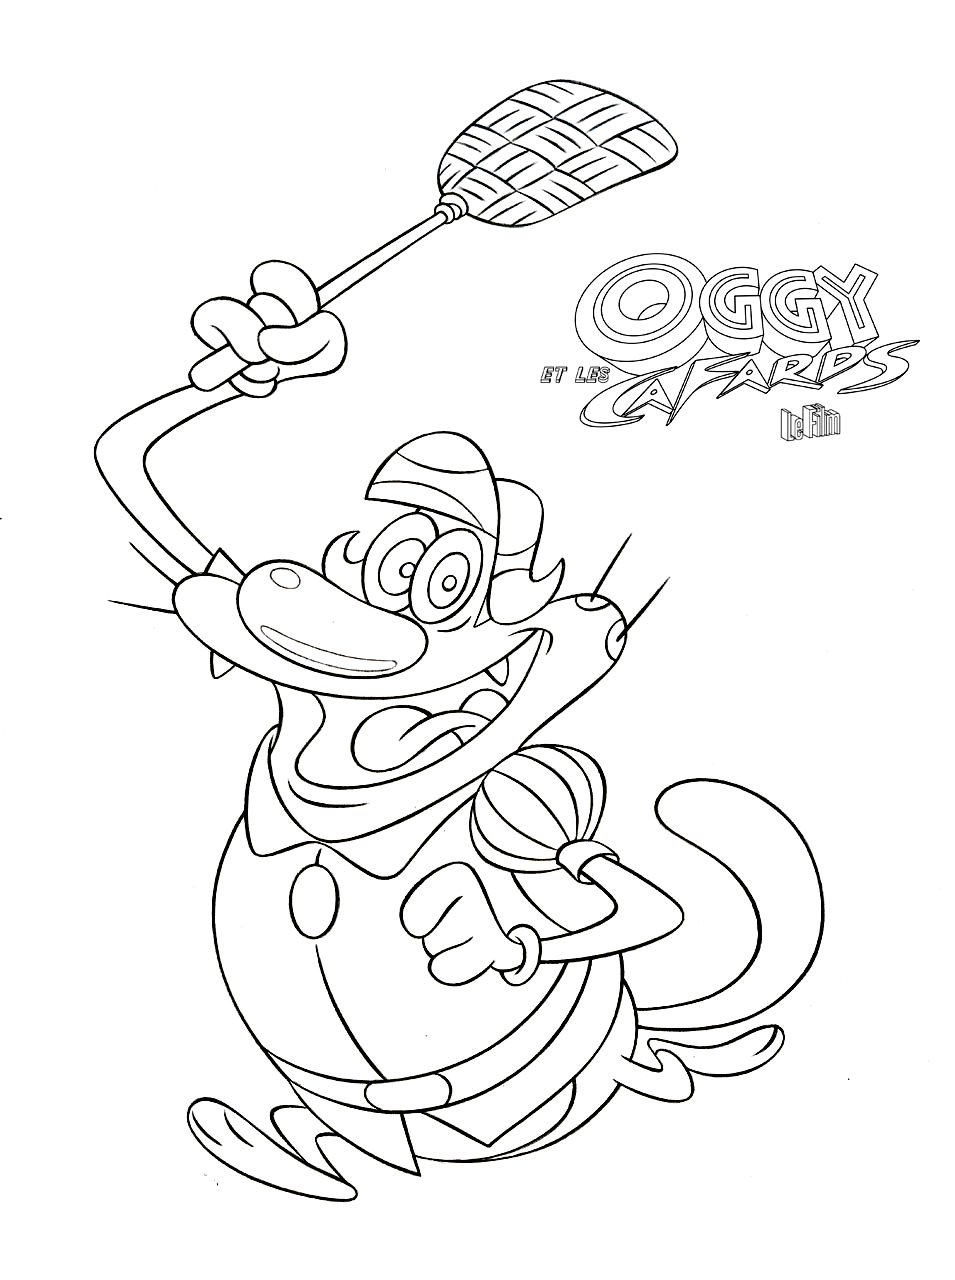 Oggy and the cockroaches to color for children - Oggy And The Cockroaches  Kids Coloring Pages